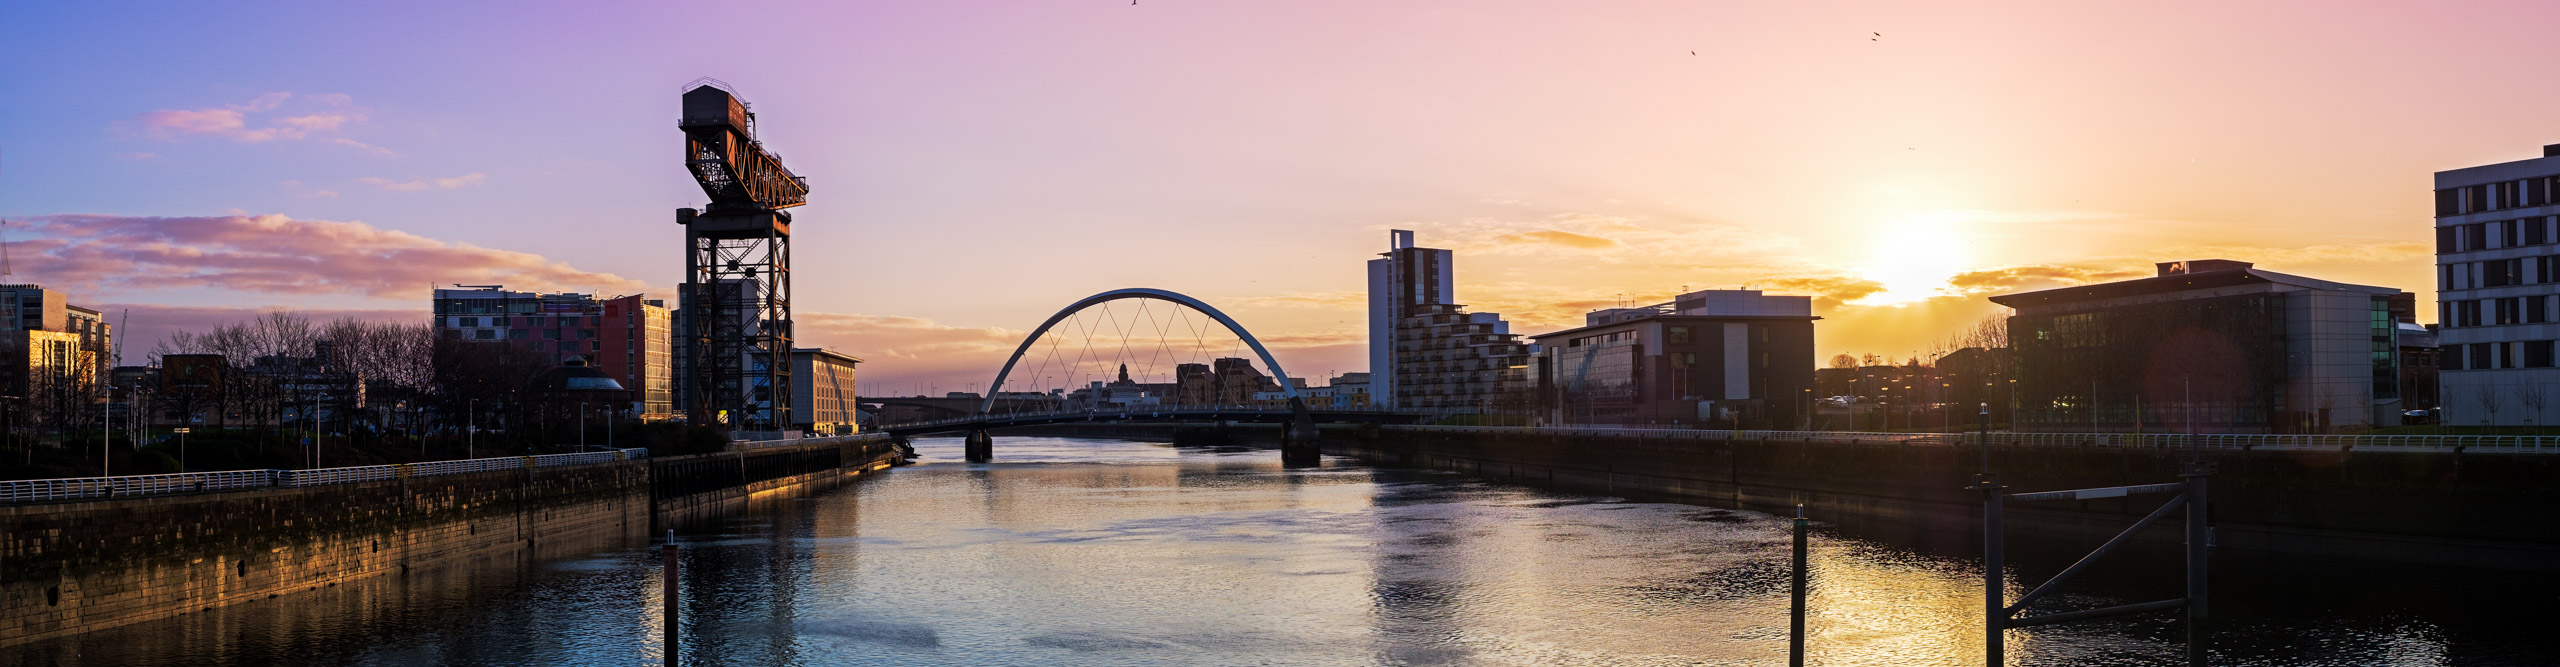 View of River Clyde with arched bridge at sunrise with a pink and blue sky, Glasgow, Scotland